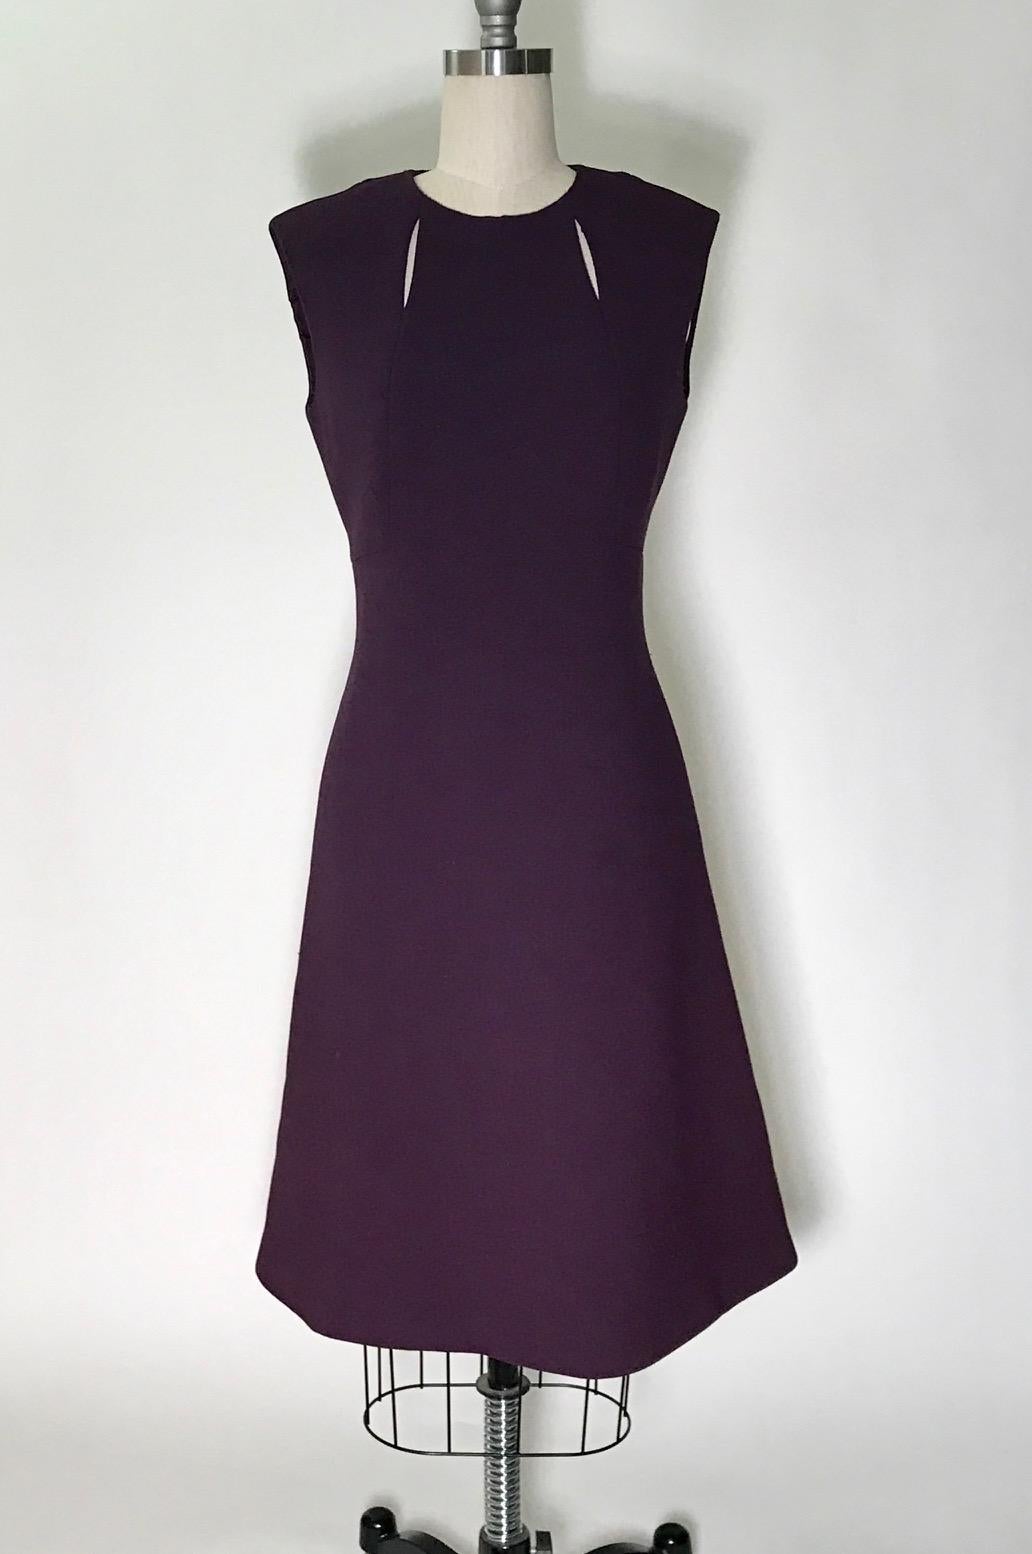 Vintage Pauline Trigere 1960s purple wool crepe A-line shift dress with open slit detail at chest. L-shaped seams at bodice. Back zip and hook and eye.

Fully lined in silky fabric. 

No size tag, see measurements.
Bust 35